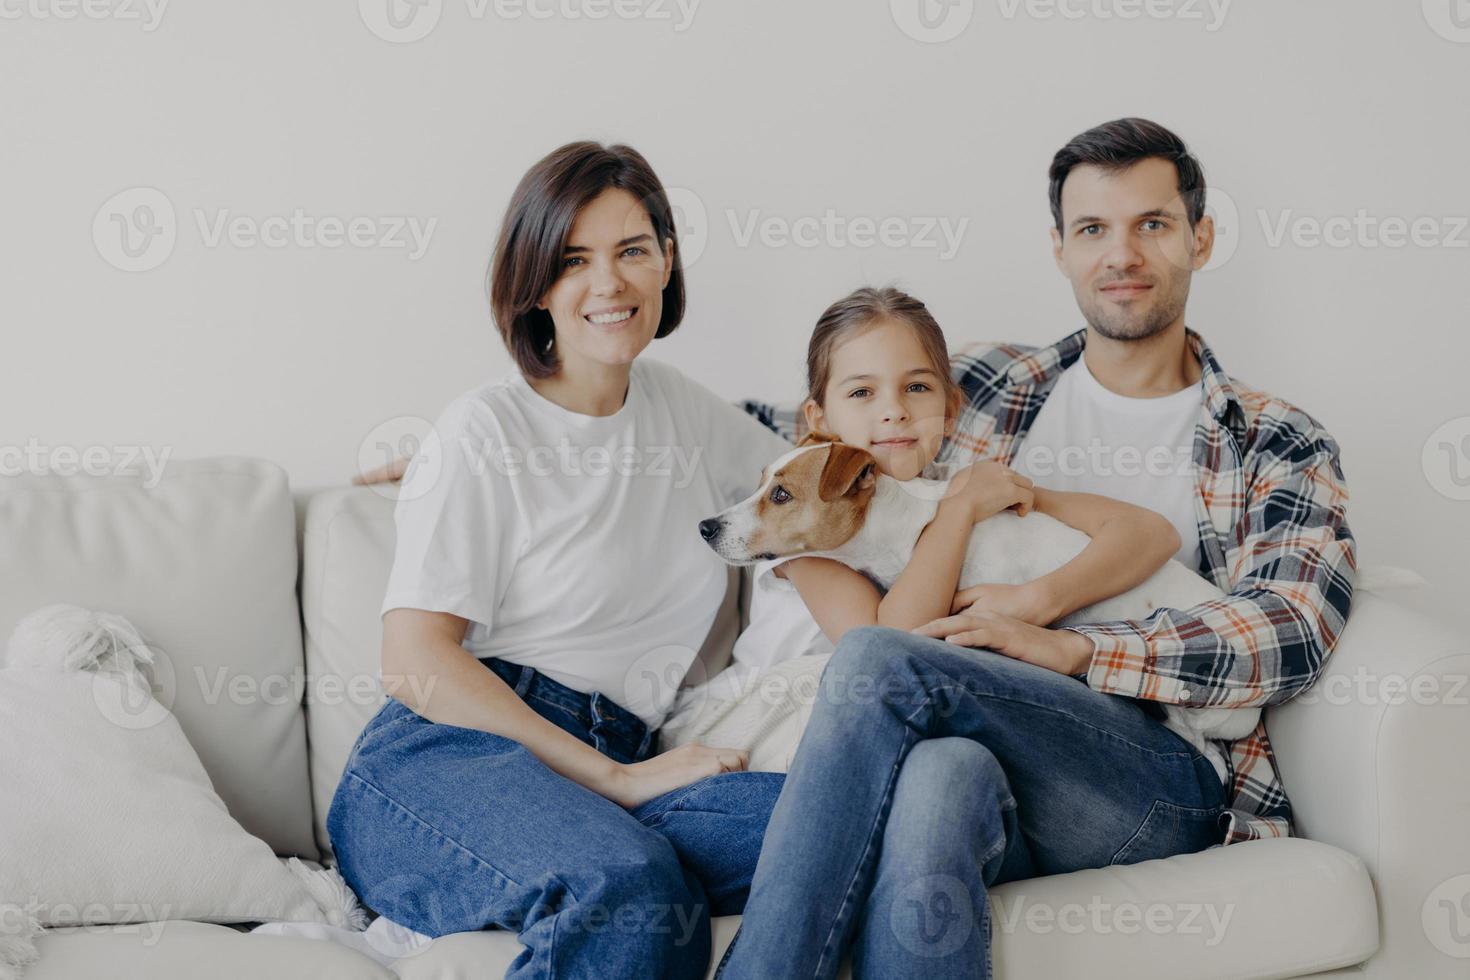 Friendly family pose together at sofa, enjoys domestic atmosphere. Father, mother, their little daughter and pedigree dog spend weekend at home, pose in living room, have happy face expressions photo